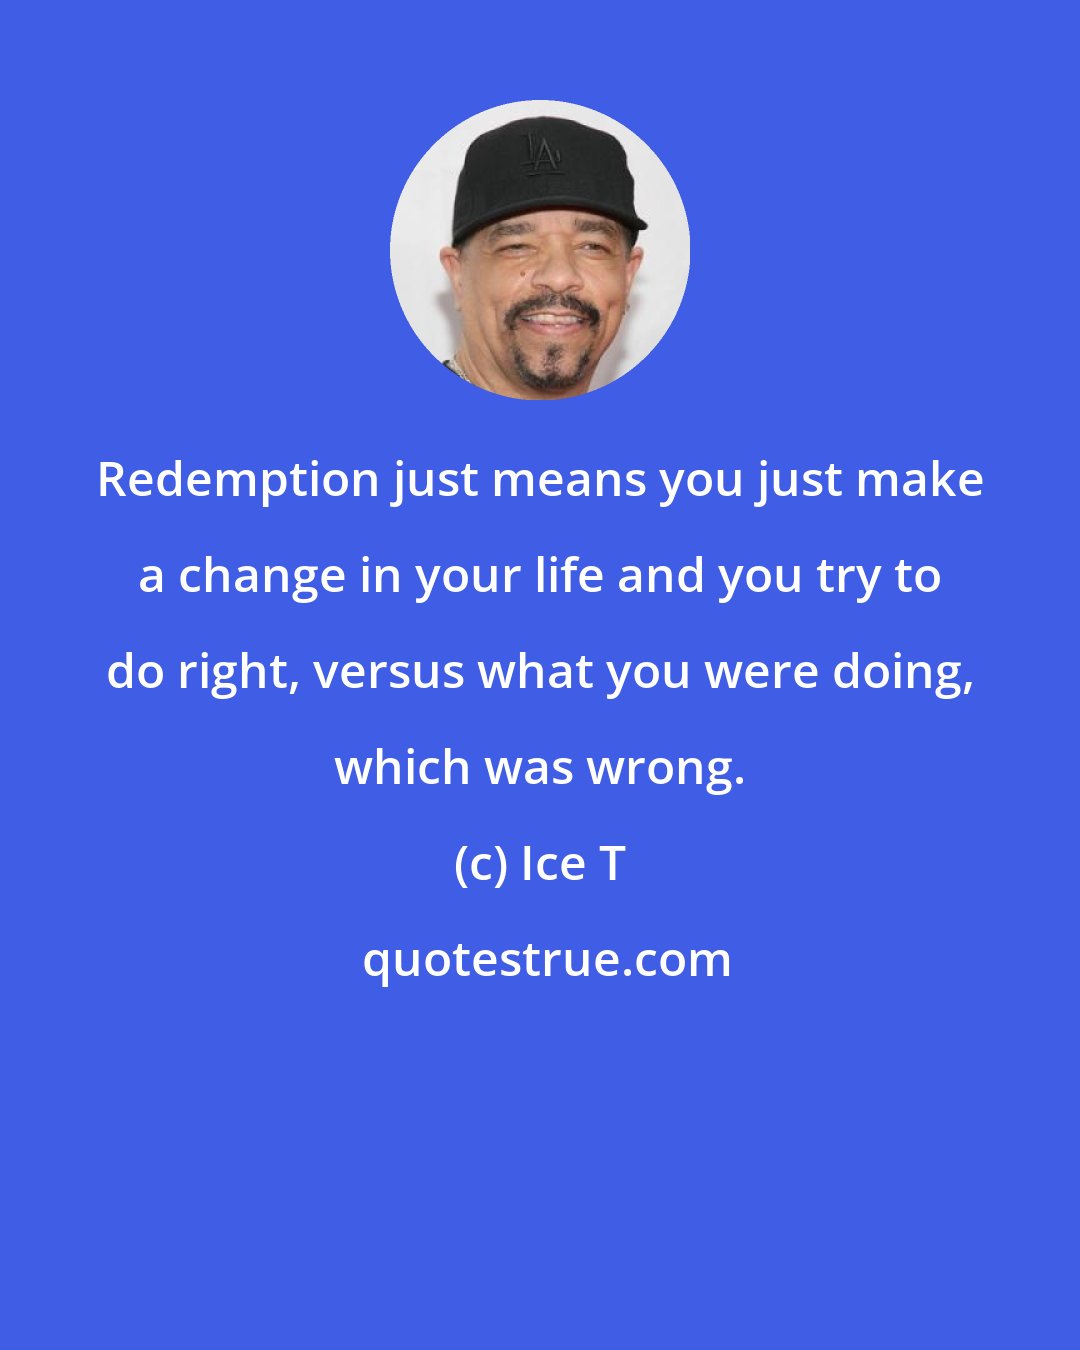 Ice T: Redemption just means you just make a change in your life and you try to do right, versus what you were doing, which was wrong.